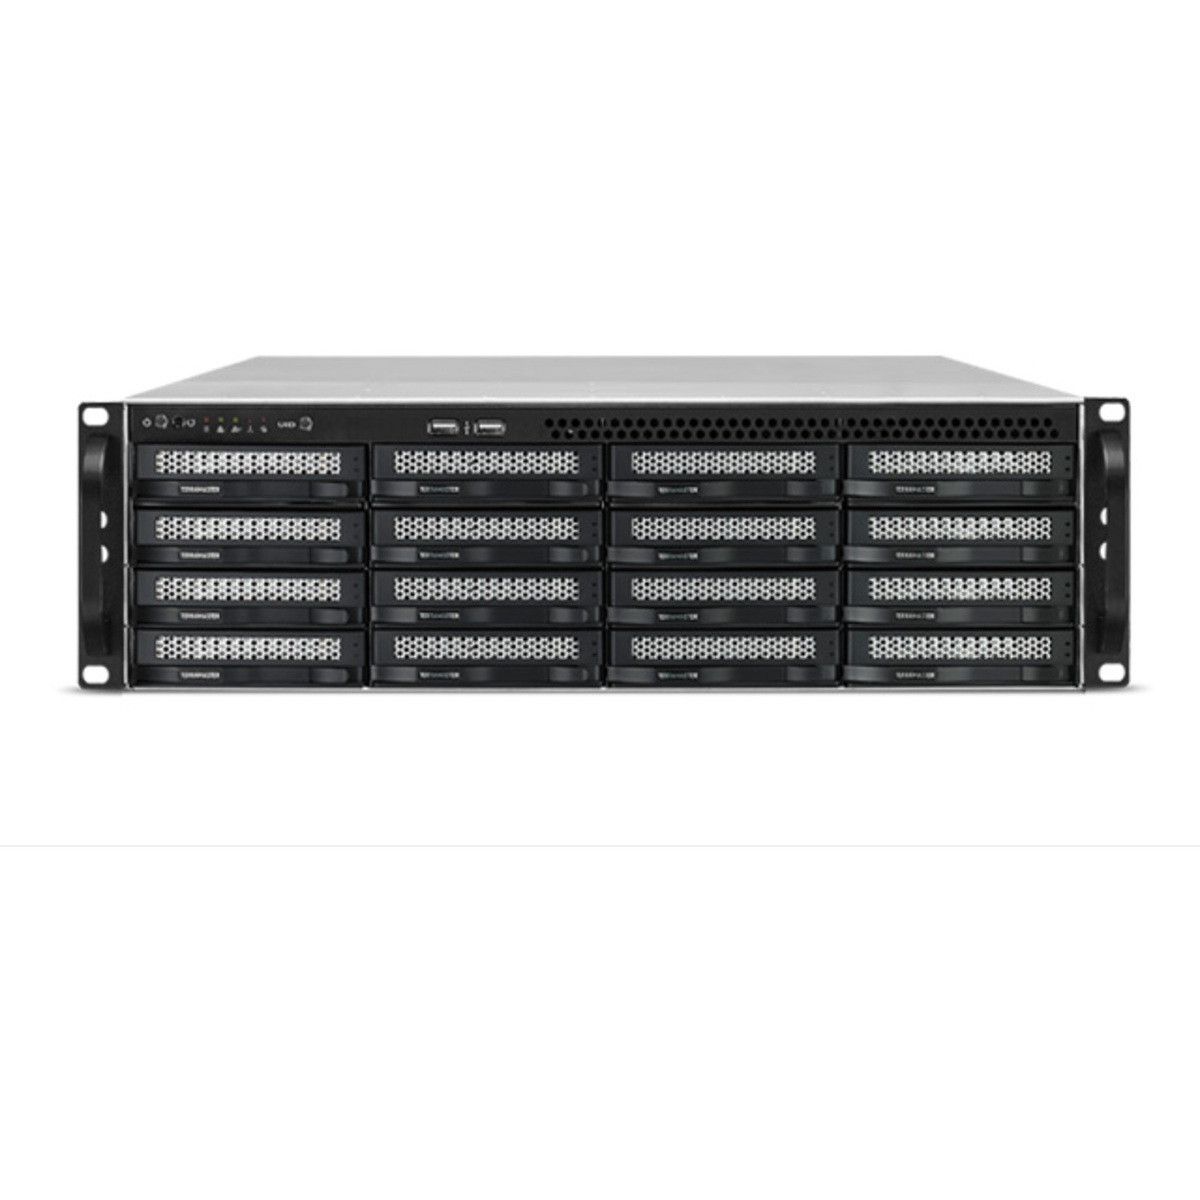 TerraMaster U16-722-2224 120tb 16-Bay RackMount Large Business / Enterprise NAS - Network Attached Storage Device 15x8tb Seagate EXOS 7E10 ST8000NM017B 3.5 7200rpm SATA 6Gb/s HDD ENTERPRISE Class Drives Installed - Burn-In Tested U16-722-2224